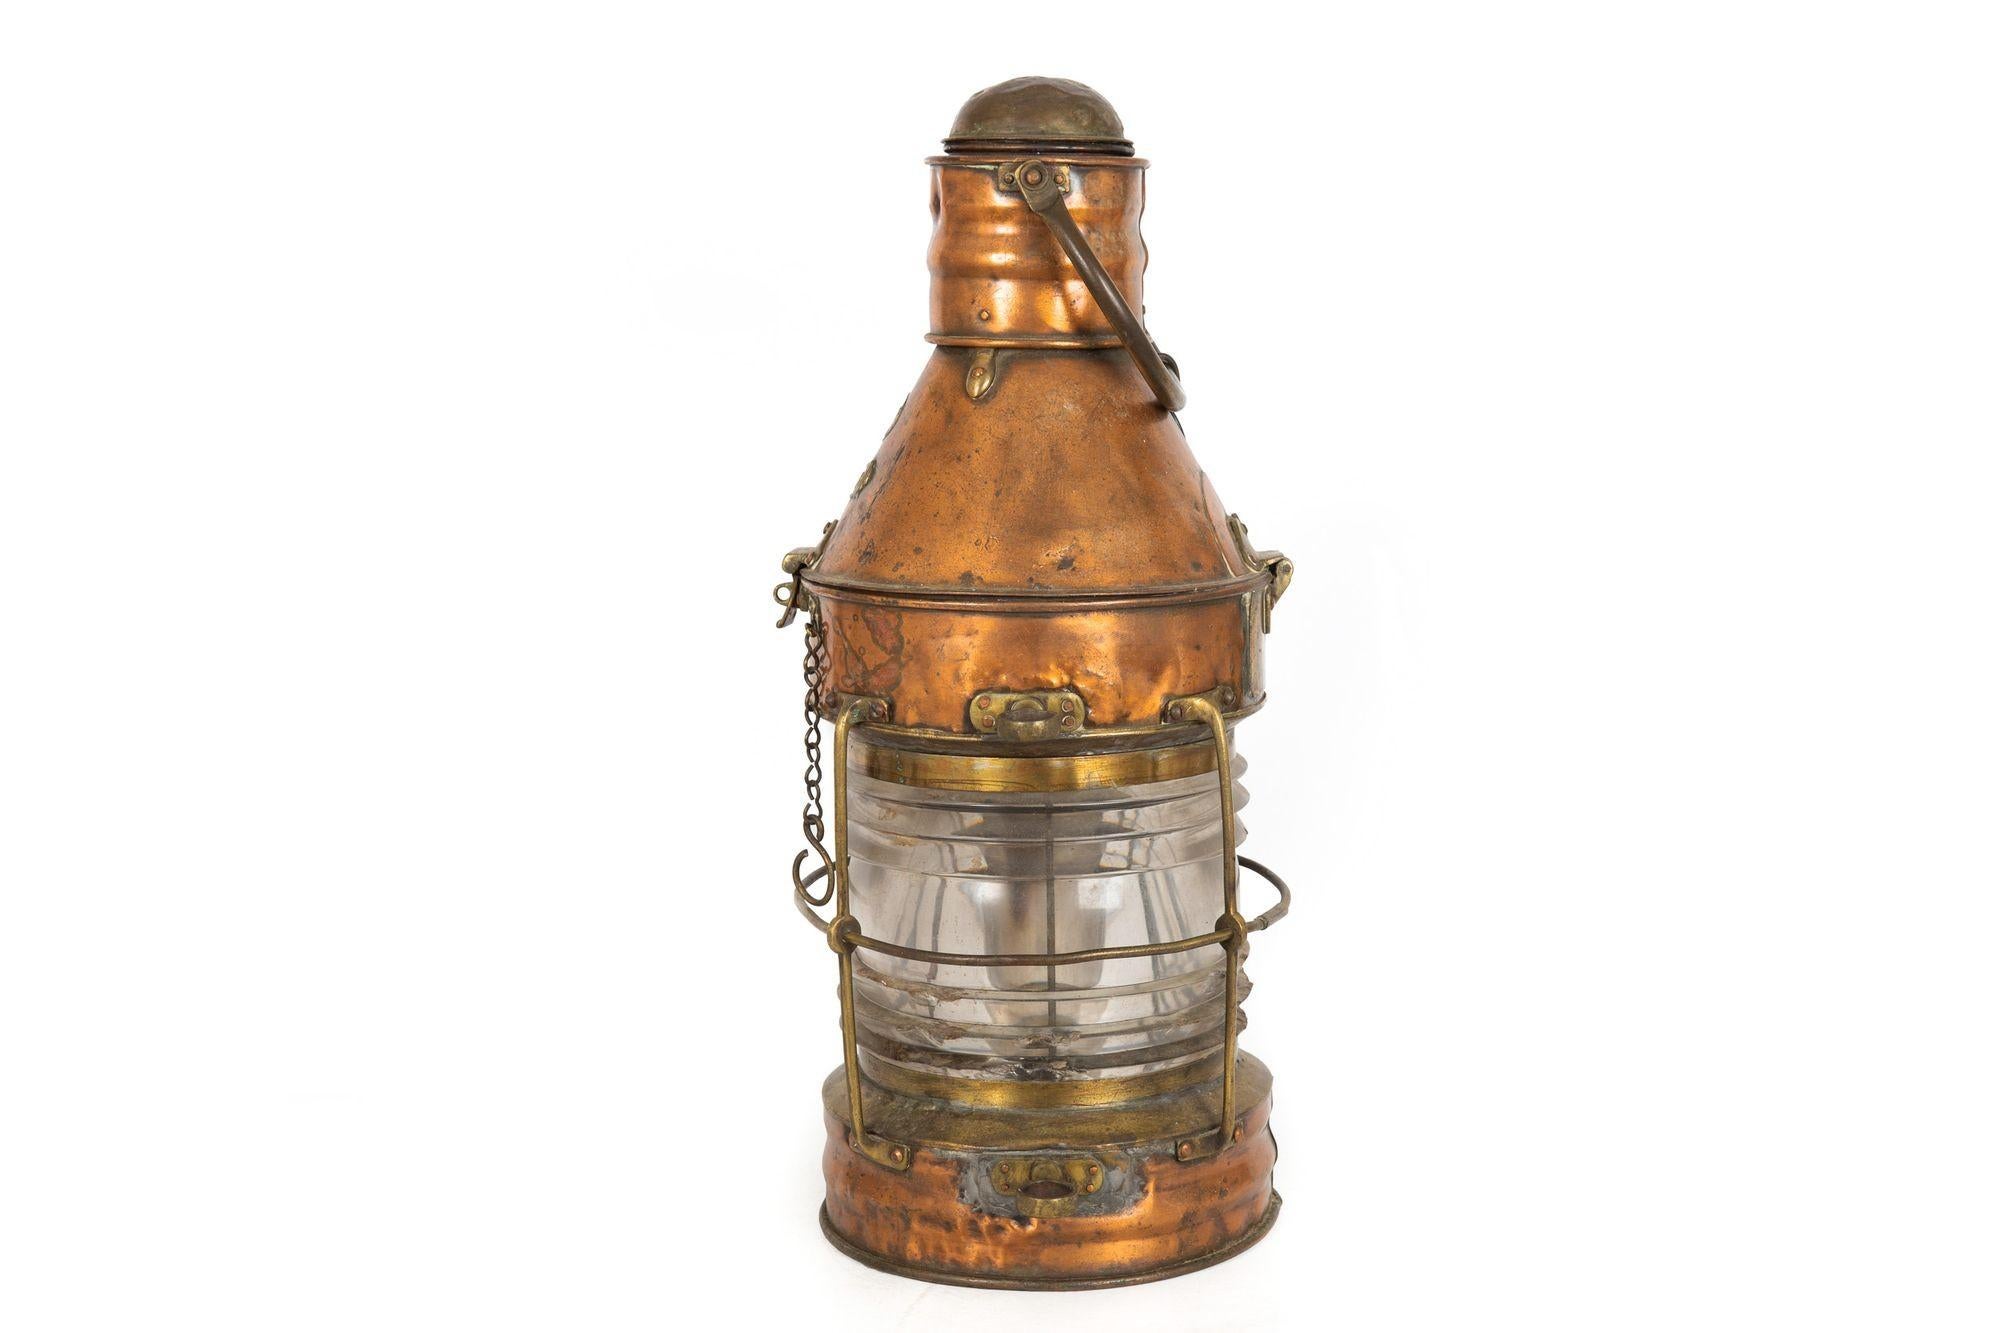 VERY LARGE ENGLISH COPPER SHIP'S ANCHOR LANTERN BY E. BACON & CO
With original maker's plaque
Item # 301GPK23P 

A very large and beautifully aged ship's anchor lantern by the firm of E. Bacon & Co of Grimsby, England, it has an applied plaque on